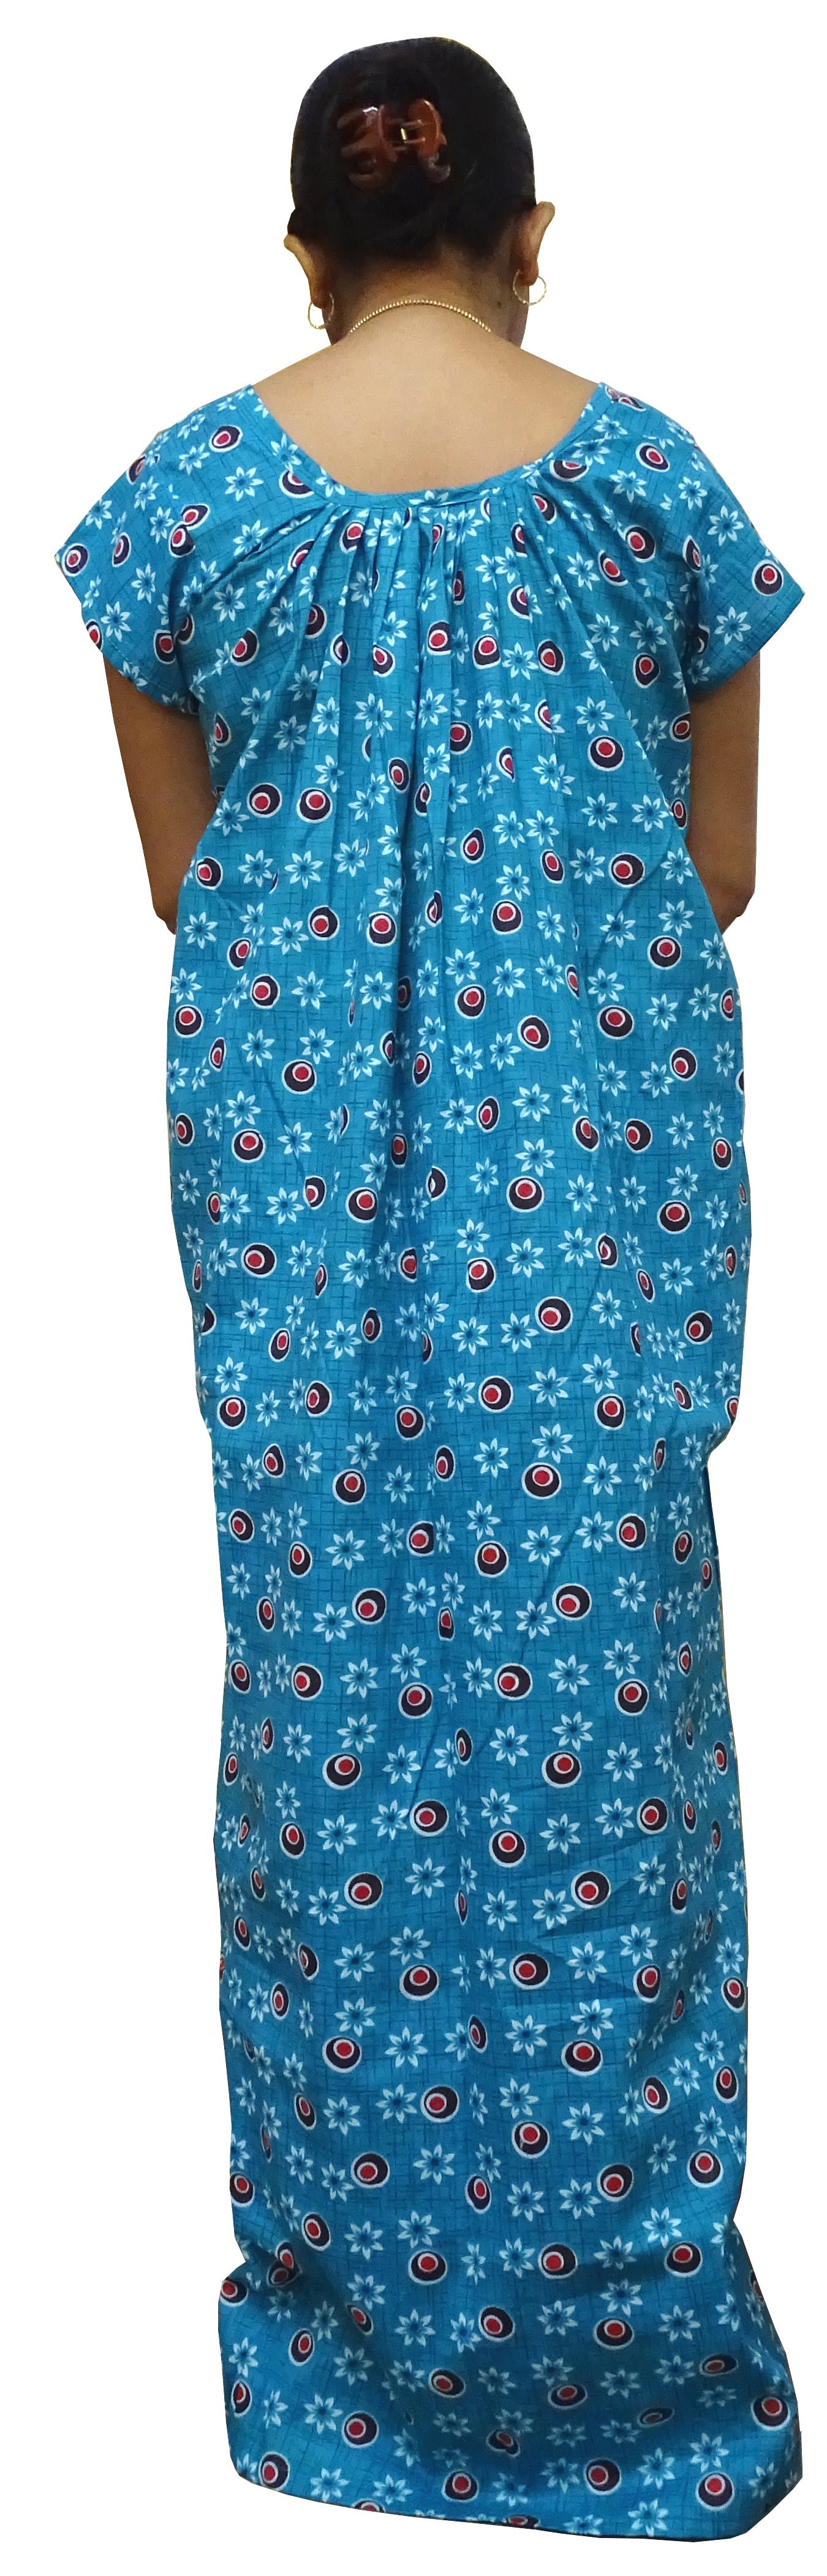 Nighty for Women Cotton Printed, Free Size, Blue body with dots (Pack of 1)